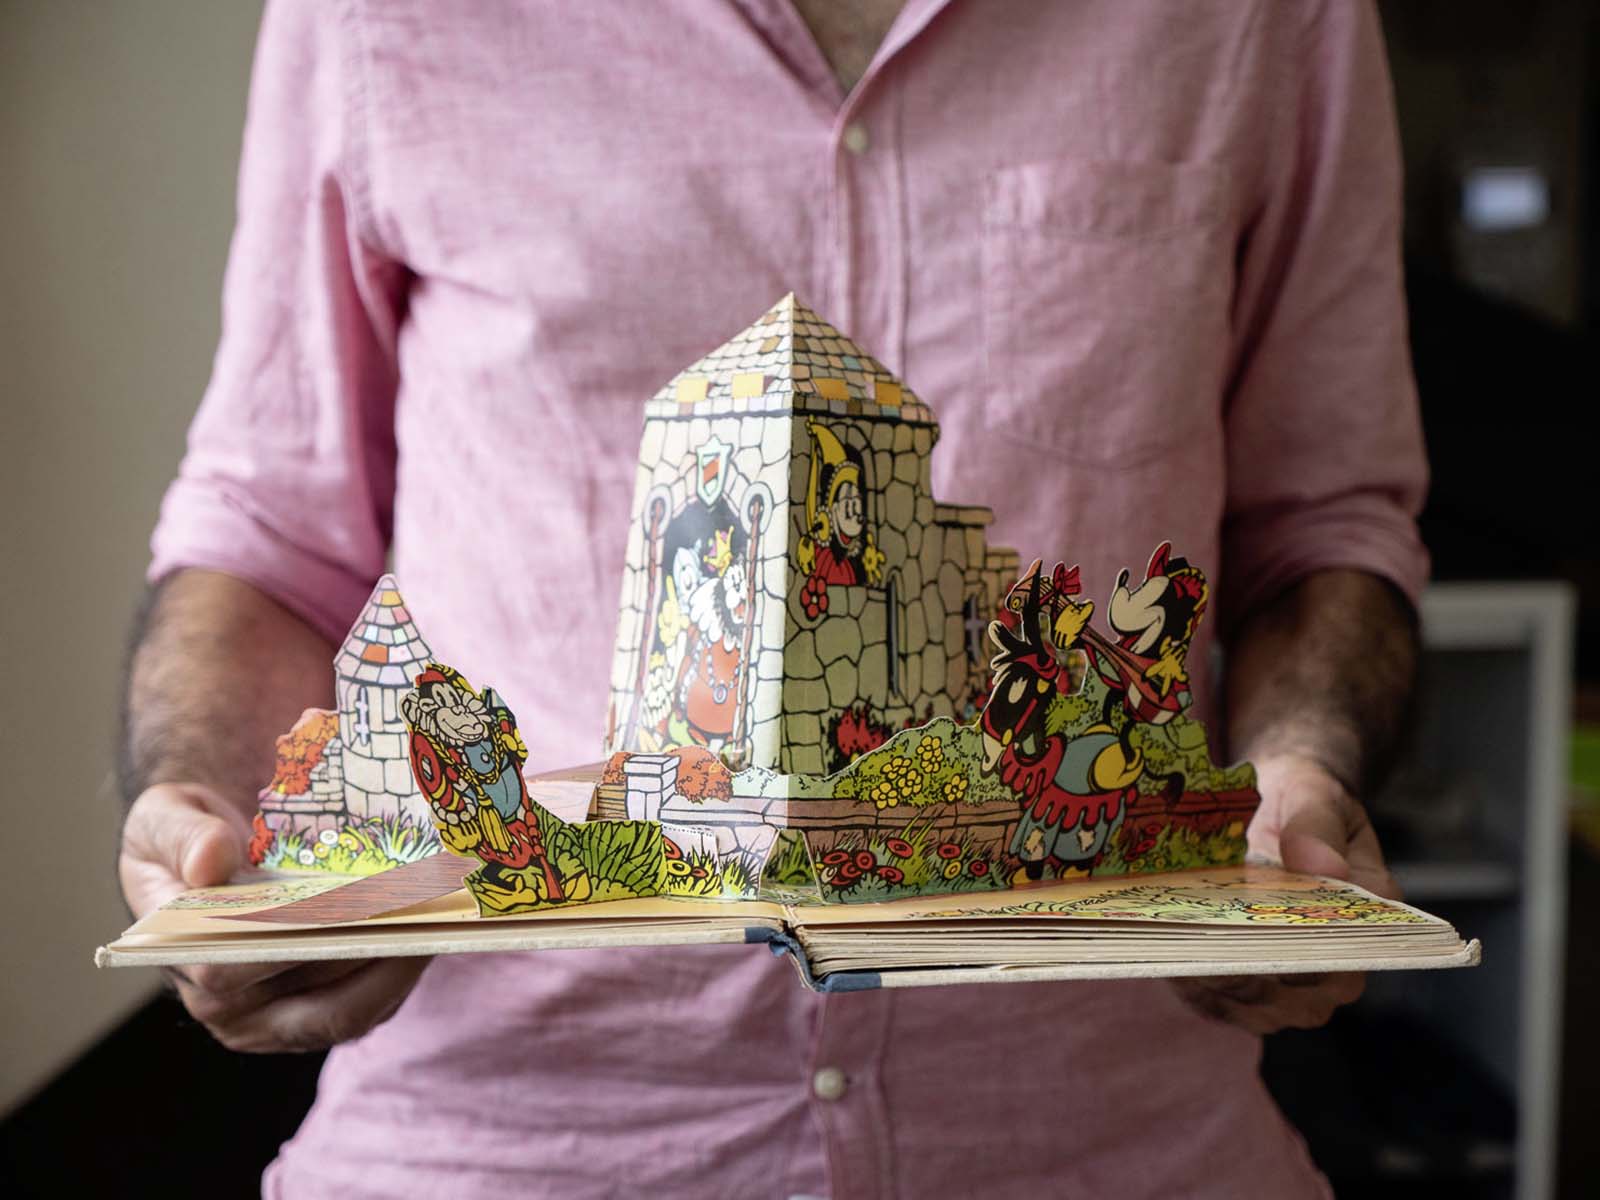 «Mickey Mouse in King Arthur’s Court» pop-up book (image: Severin Pomsel / ZB Zürich)